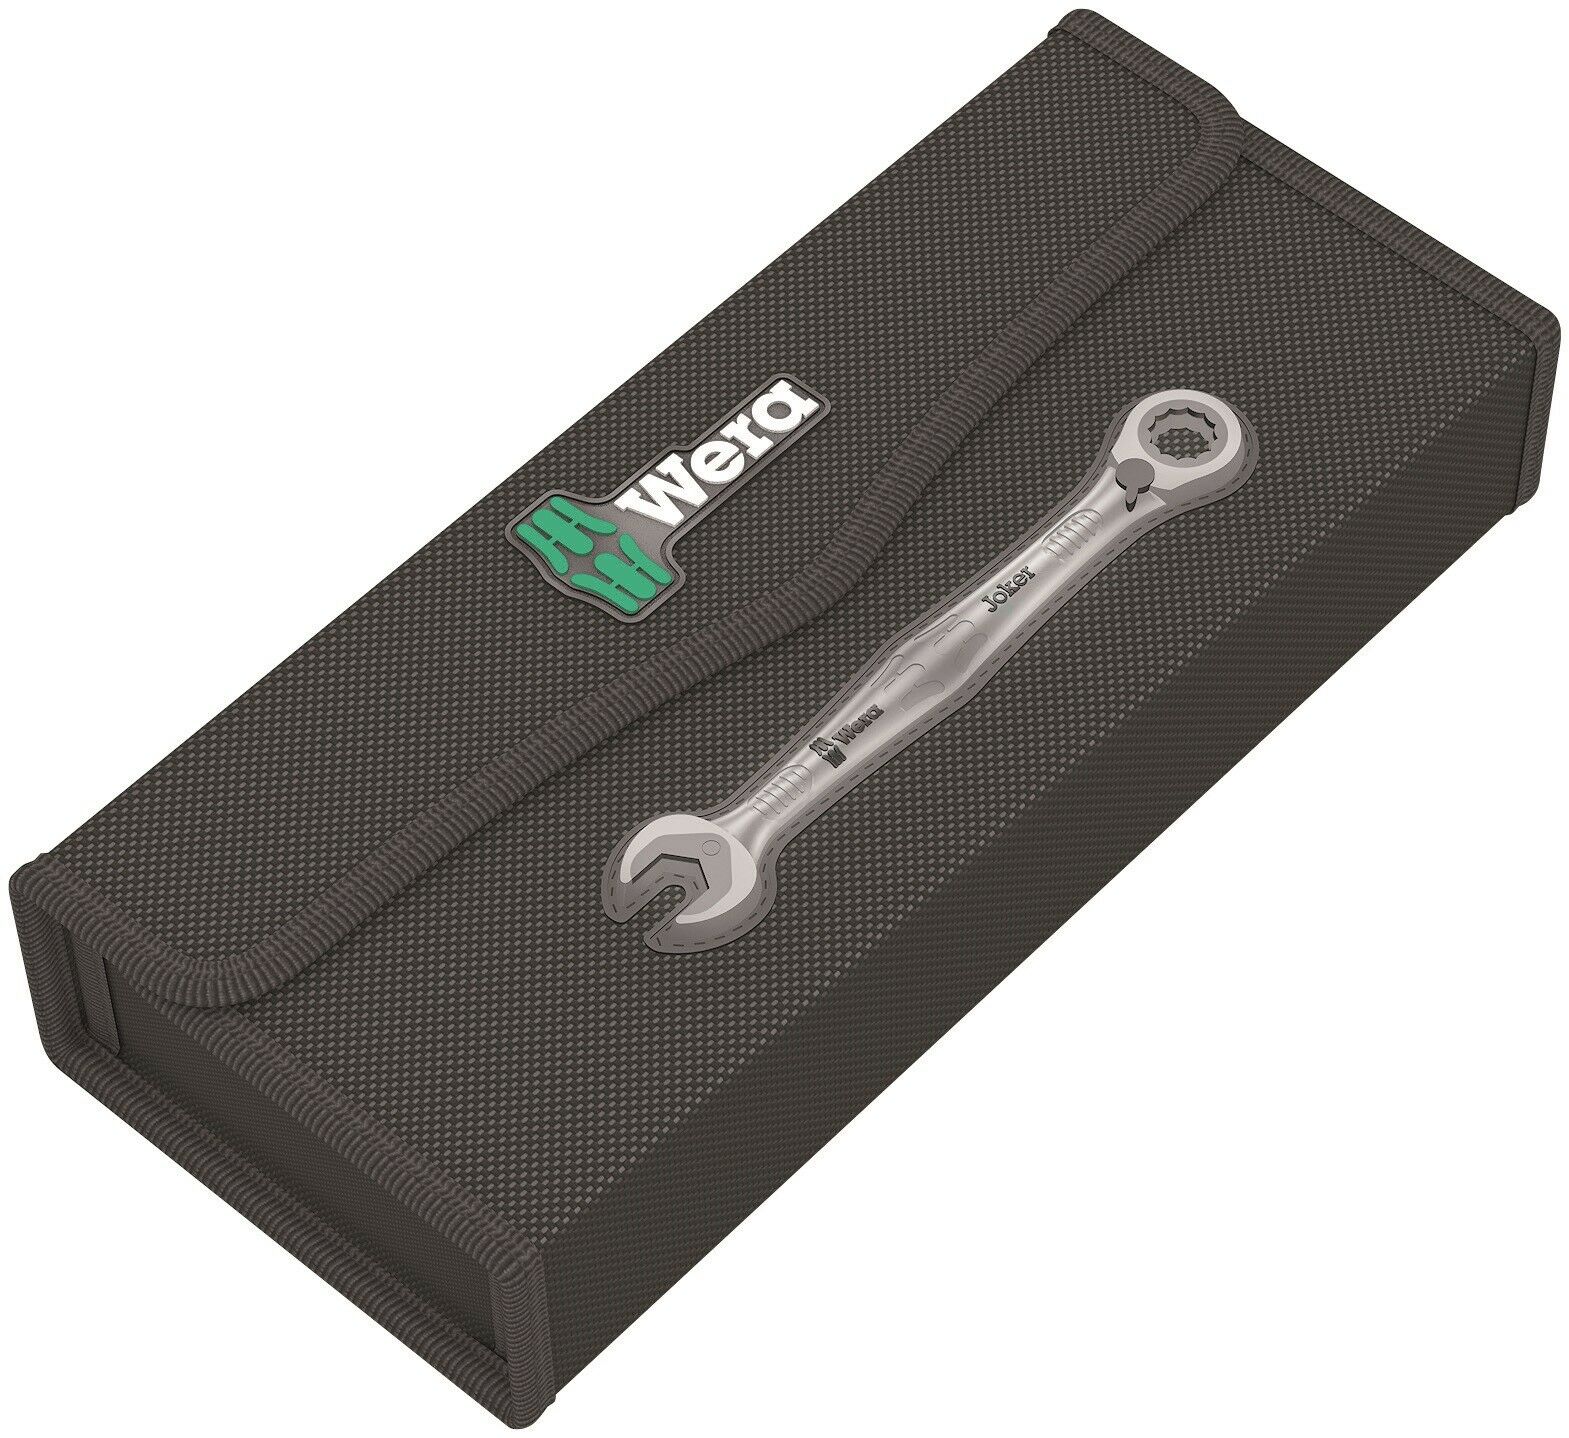 Wera 05020091001 Joker Switch Set of Ratcheting Combination Wrenches, 11 Pieces